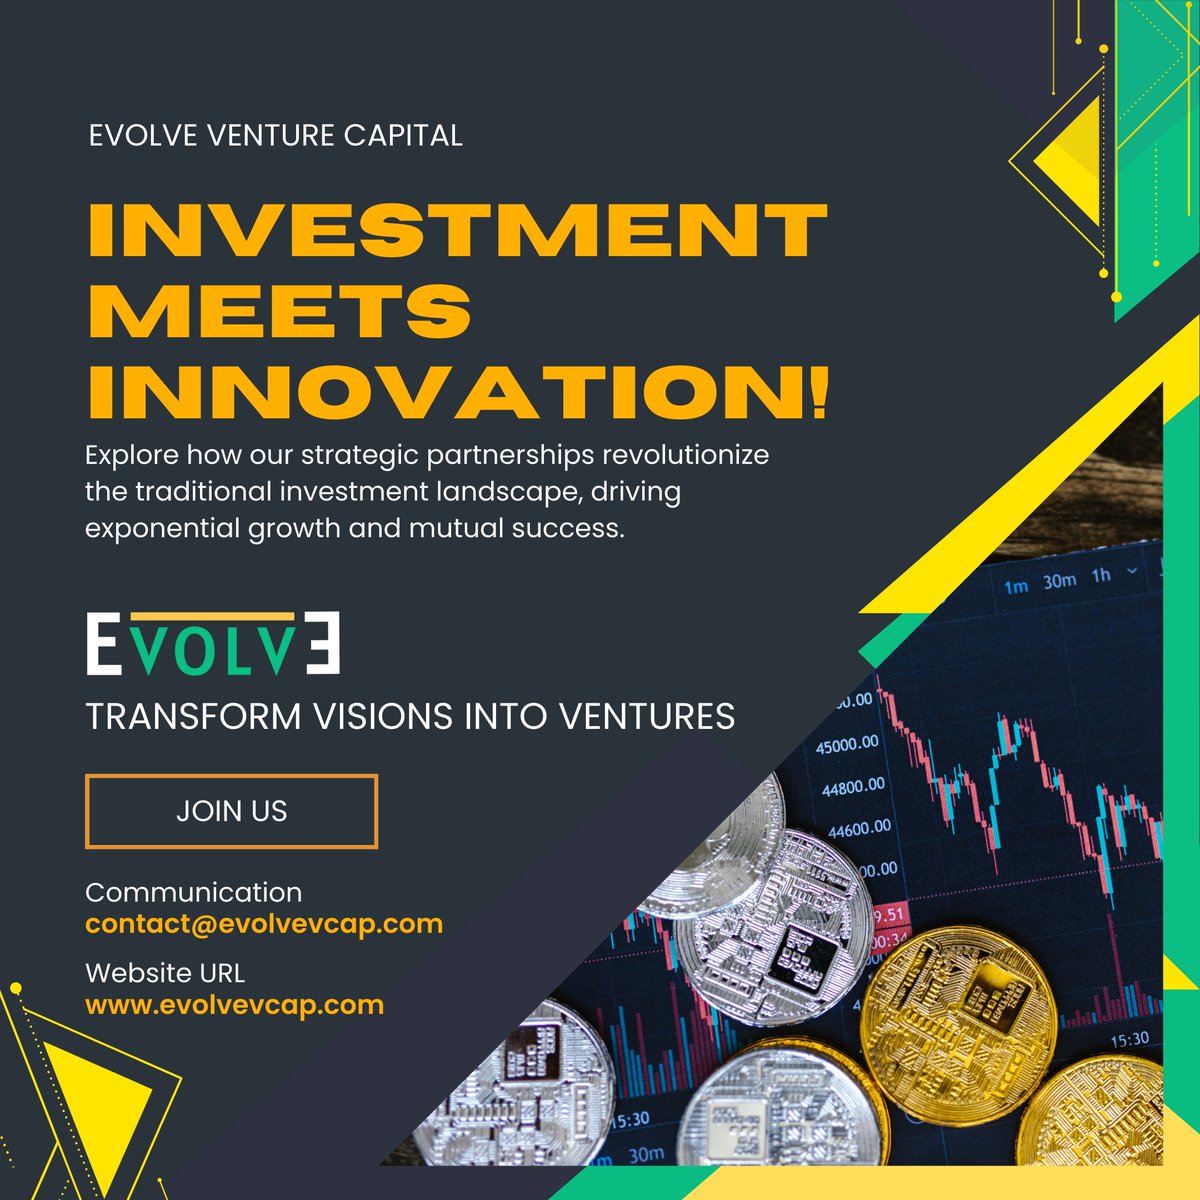 🌱 'Investment meets innovation! 🚀

linkedin.com/feed/update/ur…

For More Information:
evolvevcap.com
contact@evolvevcap.com

#InvestInInnovation #VentureCapital #StrategicPartnerships #ExponentialGrowth #MutualSuccess #InnovationEconomy #StartupFunding #TechInvestment